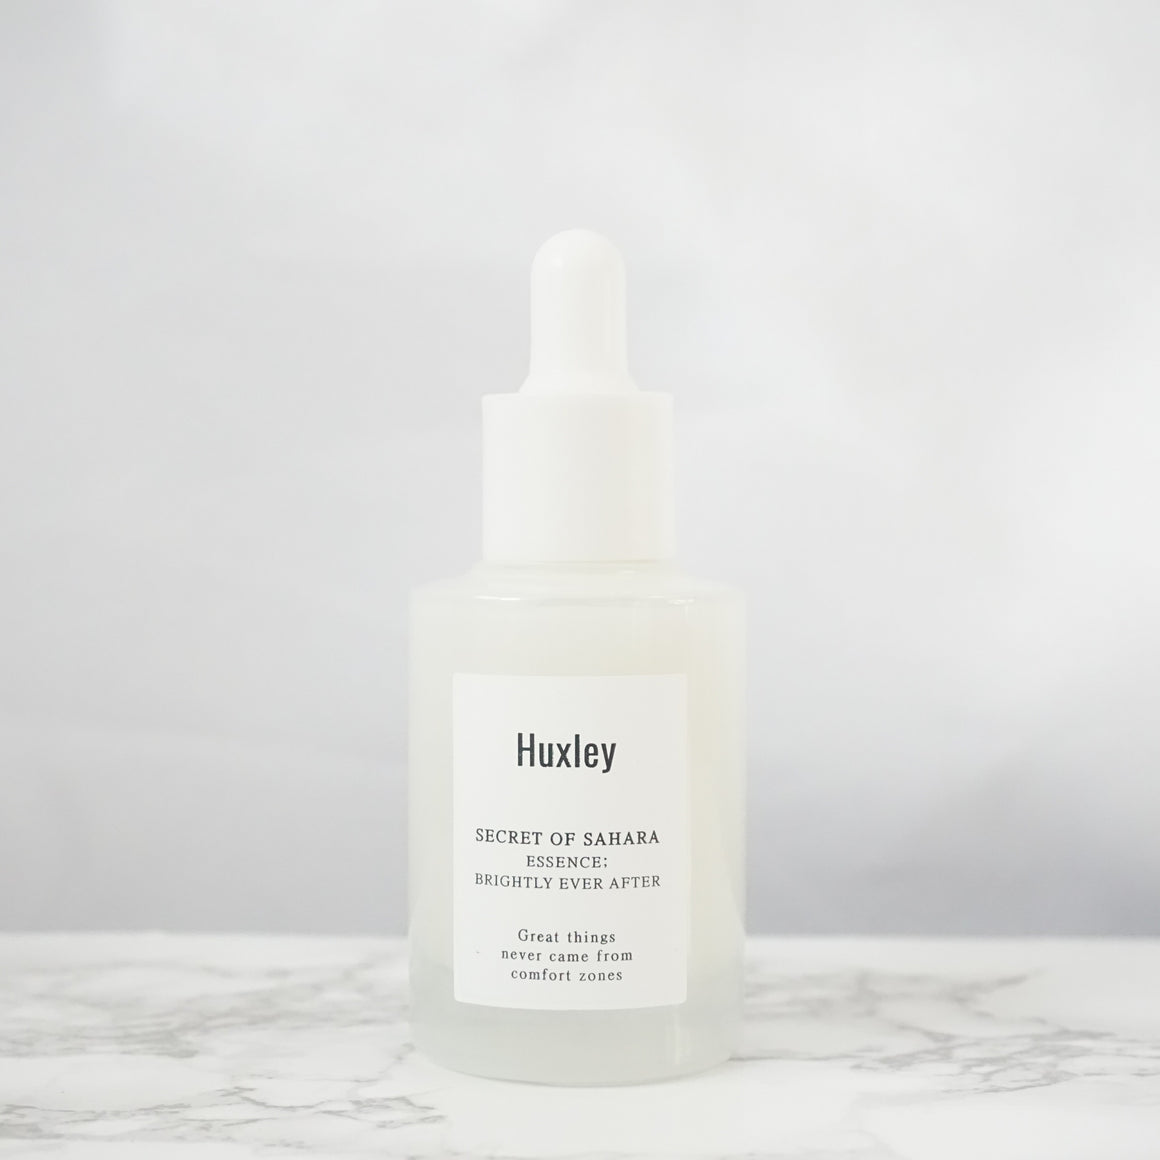 HUXLEY Brightly Ever After Essence